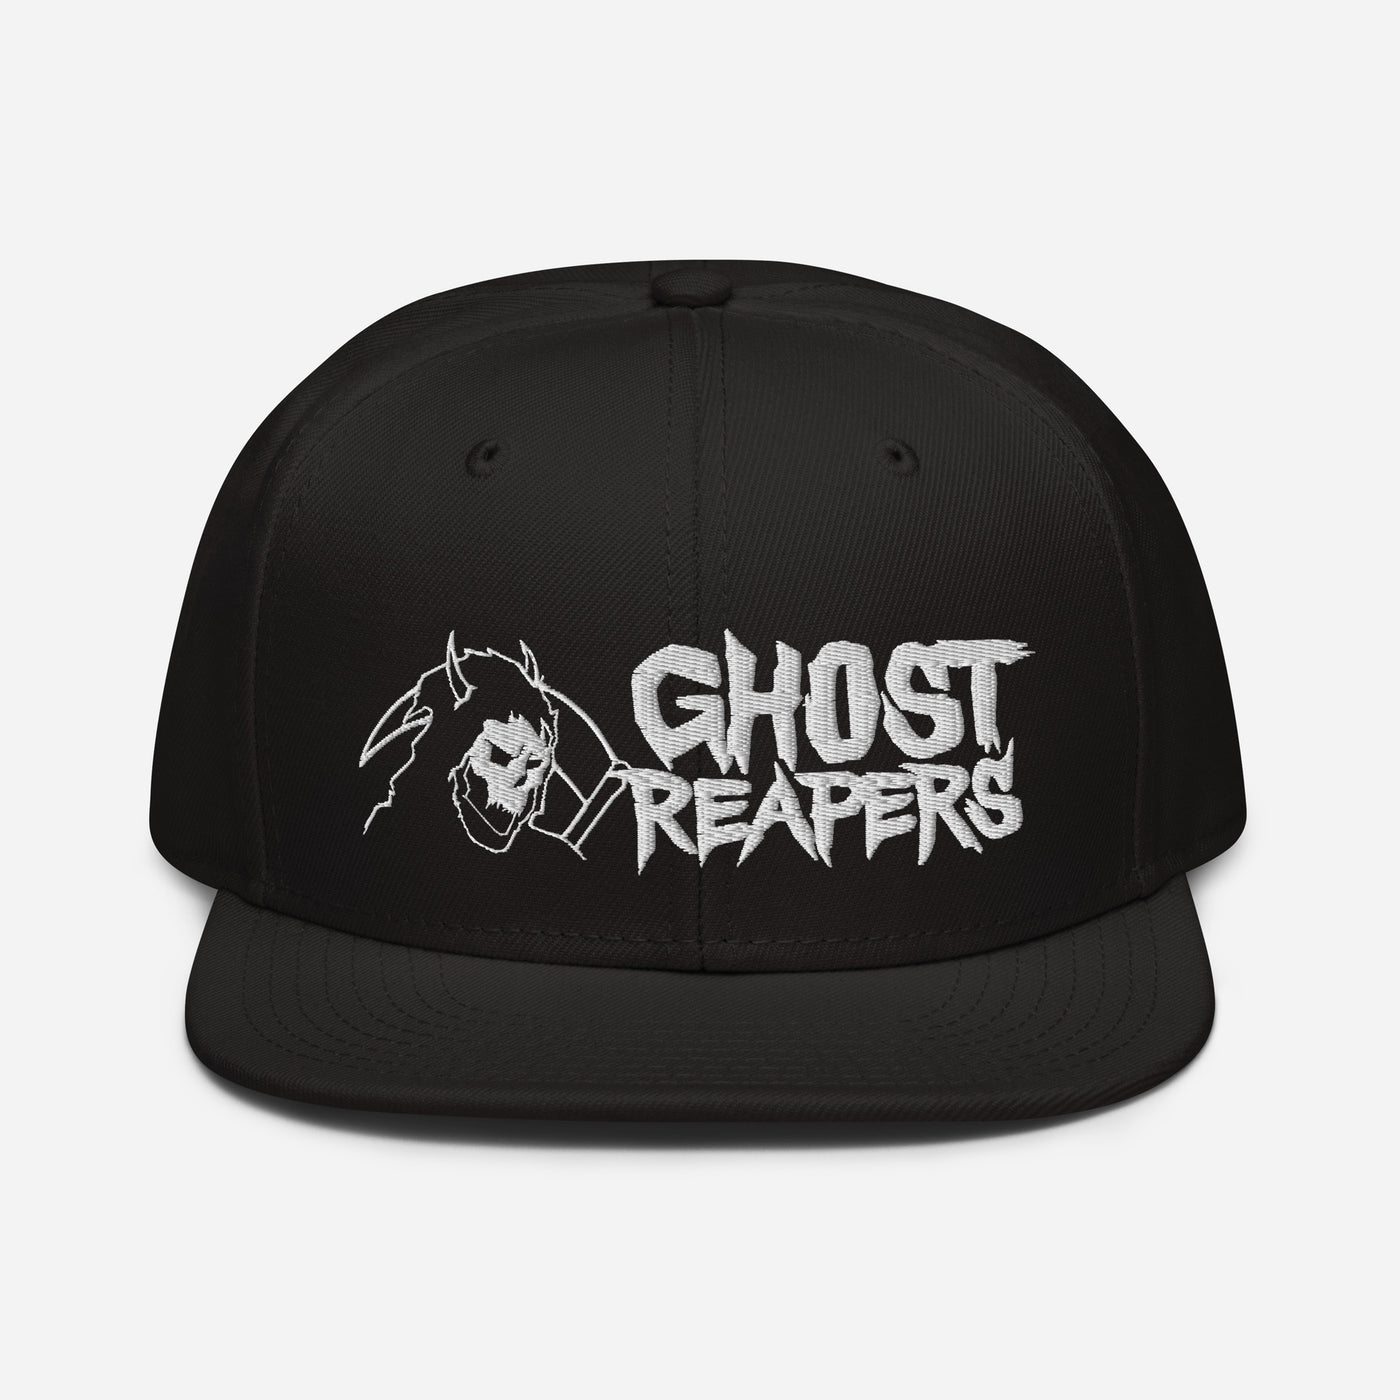 GHOST REAPERS - Blk Snapback Hat